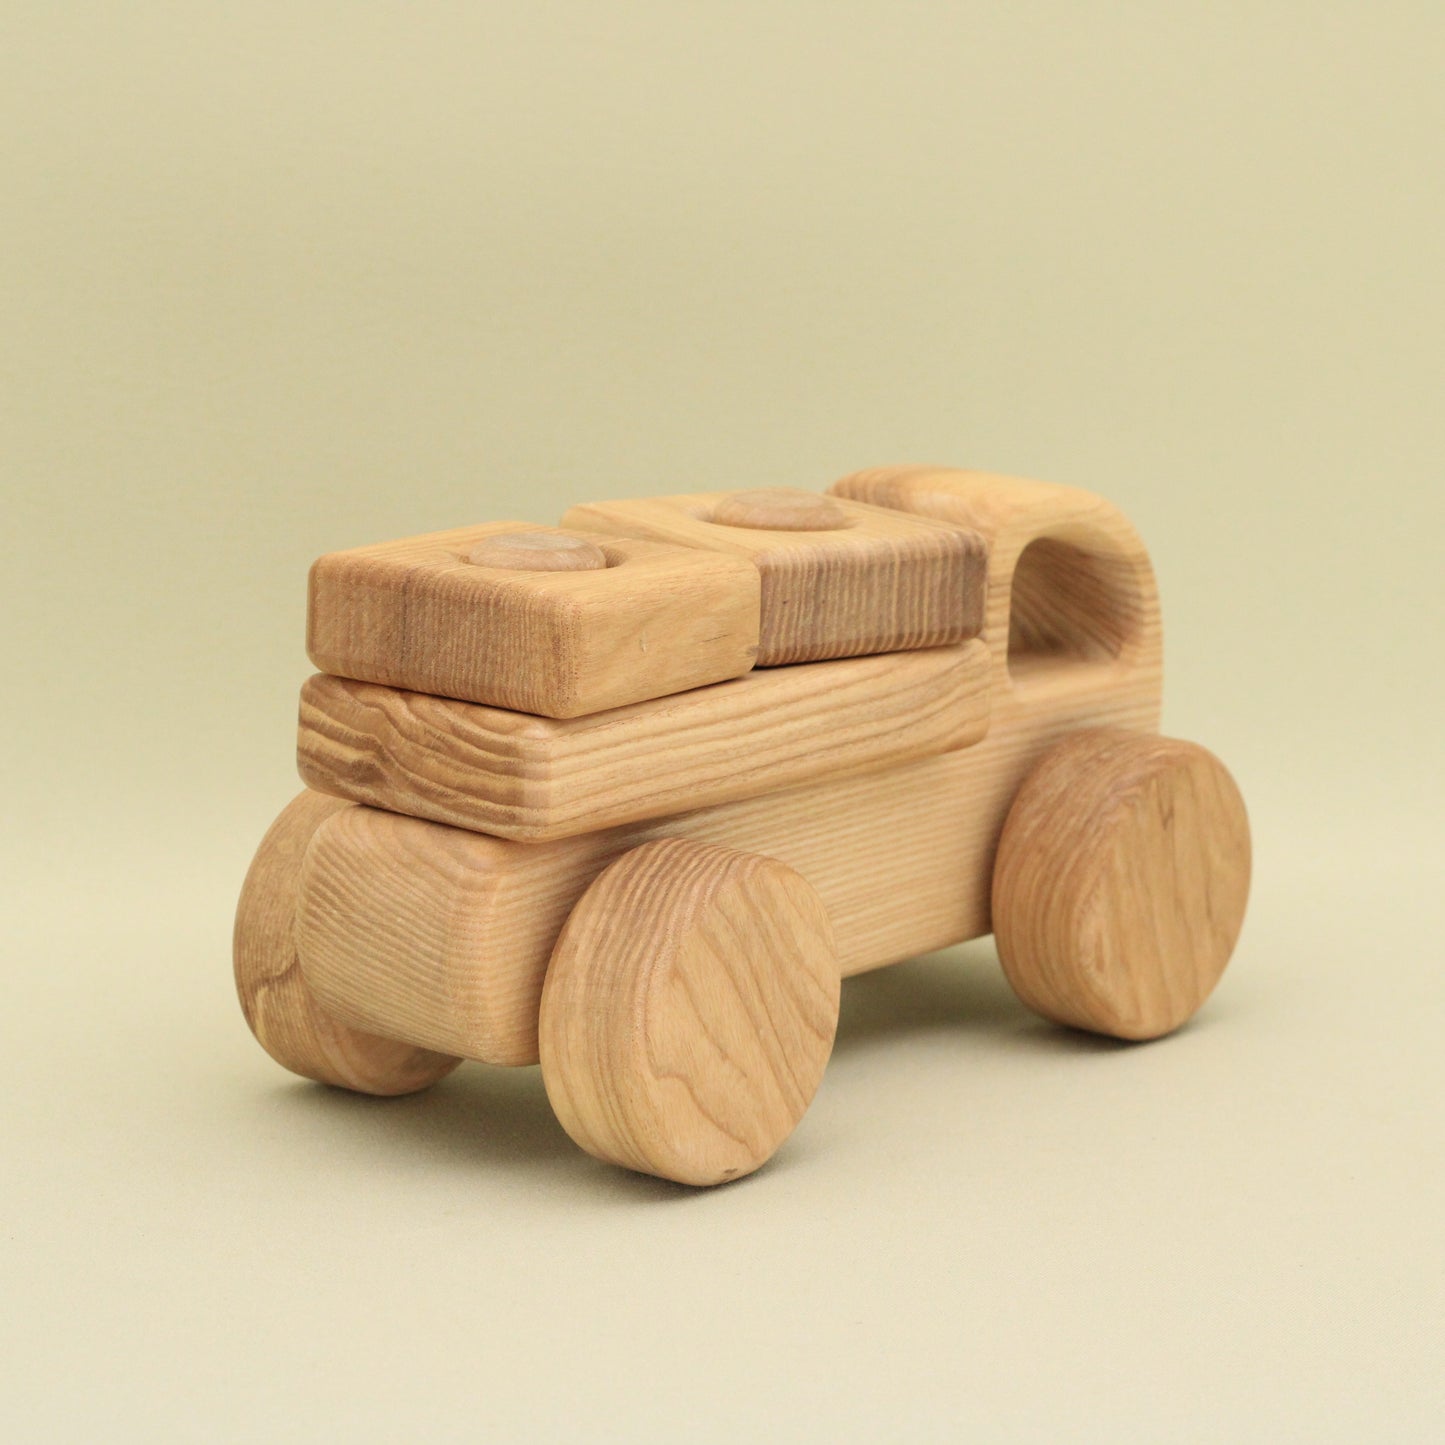 Lotes Toys Wooden Construction Vehicles Car BT71